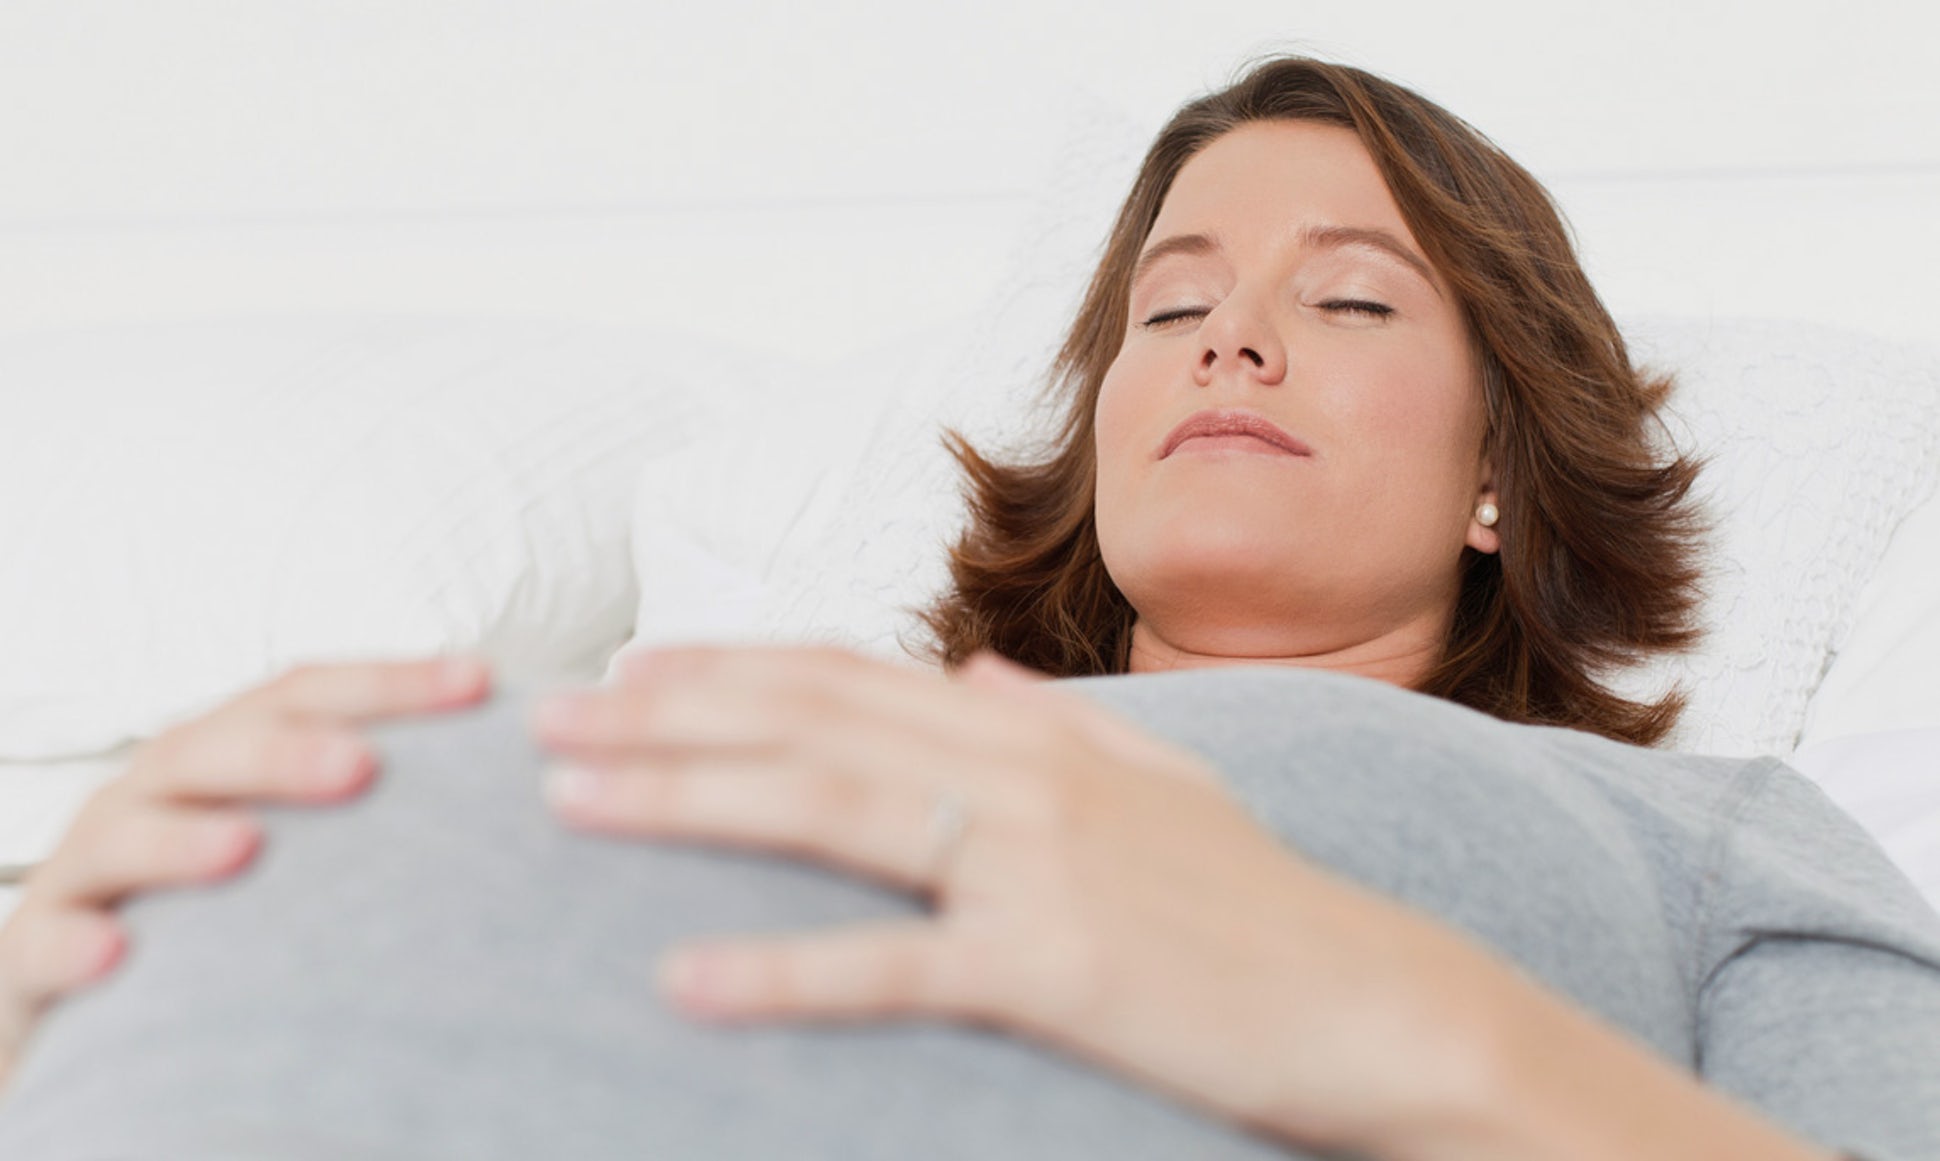 Pregnant Woman Relaxing